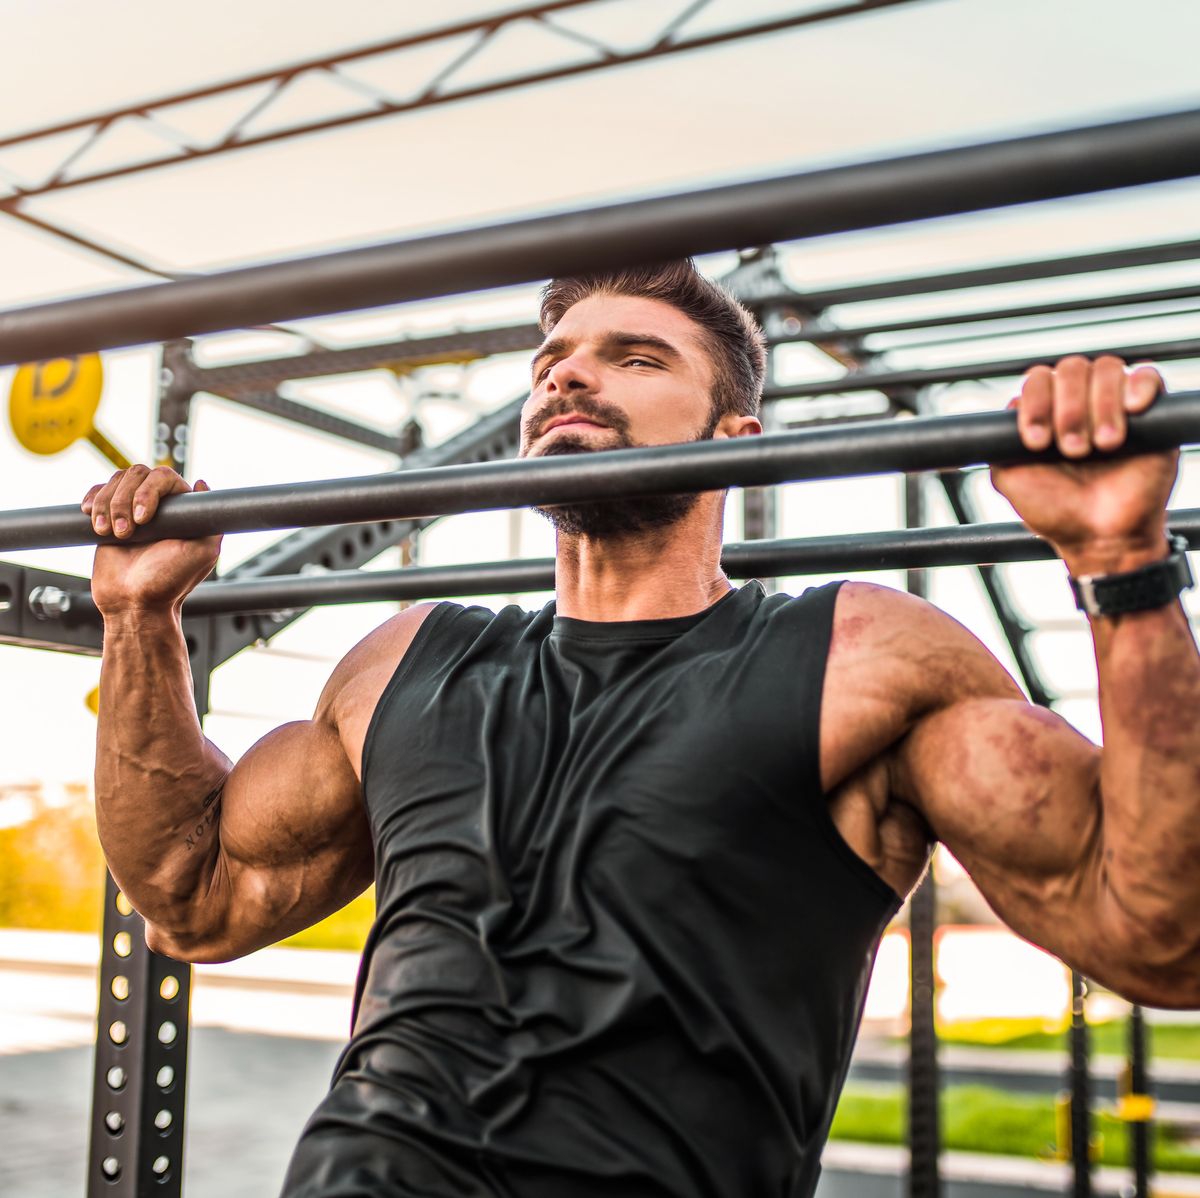 30 Day Pull Up Challenge For Men: How To Get Stronger